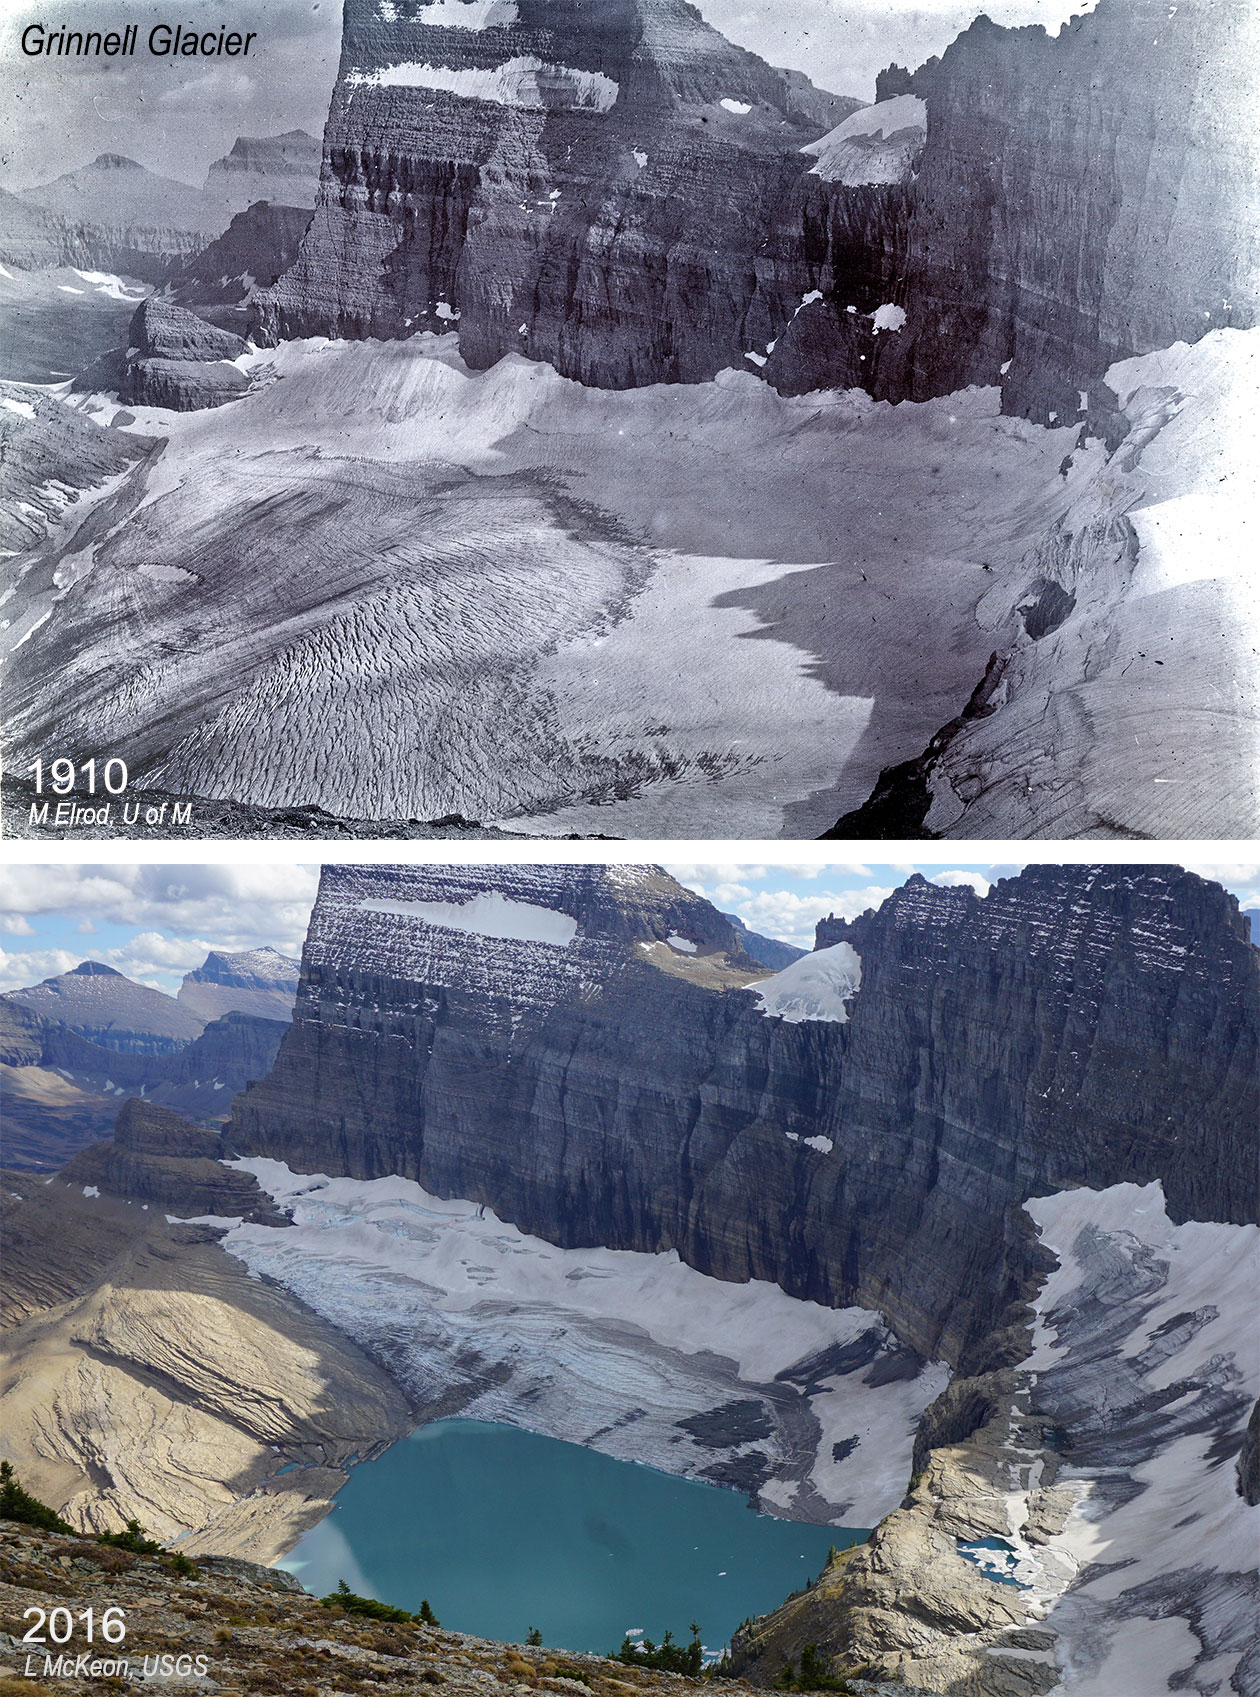 Photographs of Grinnell glacier at two points in time. Photo 1: Black and white photo of Grinnell Glacier in 1910. The glacier forms a large patch of ice at the base of a cliff. Photo 2: Color photo of Grinnell Glacier in 2016. The glacier how forms a narrow ribbon at the base of a cliff, with a lake in a depression at the foot of the glacier. The glacier has not broken into two parts, which are considered separate glaciers.